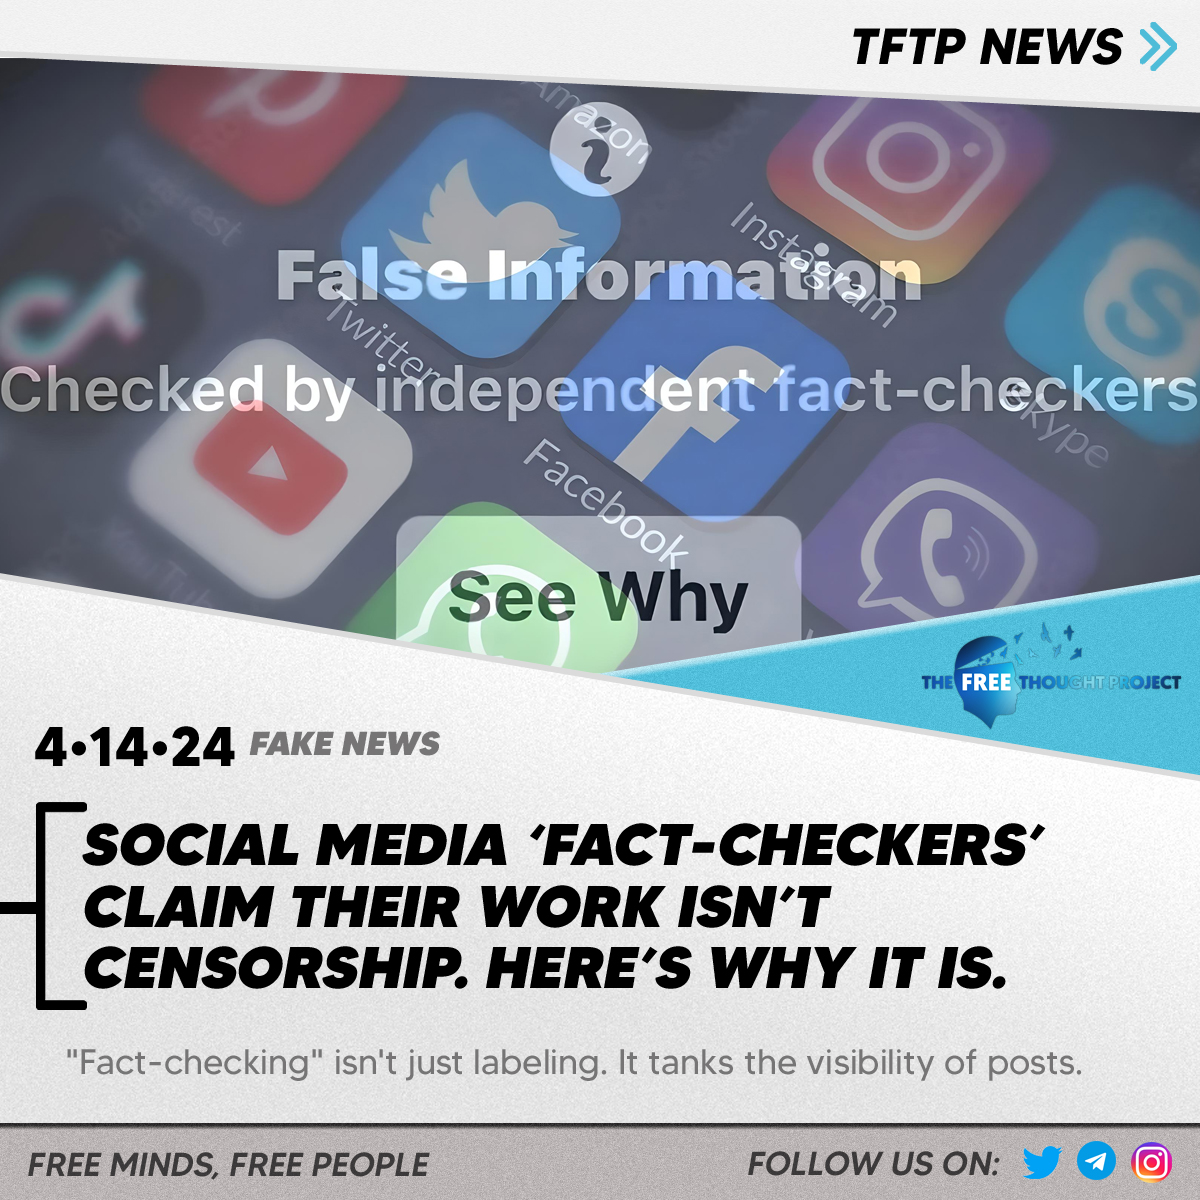 According to Facebook,posts that get fact-checked experience a 95% drop in clicks. In other words, even if this content is not outright removed, it is made virtually invisible. That’s censorship by any other name. Read More: thefreethoughtproject.com/fake-news/soci… #TheFreeThoughtProject